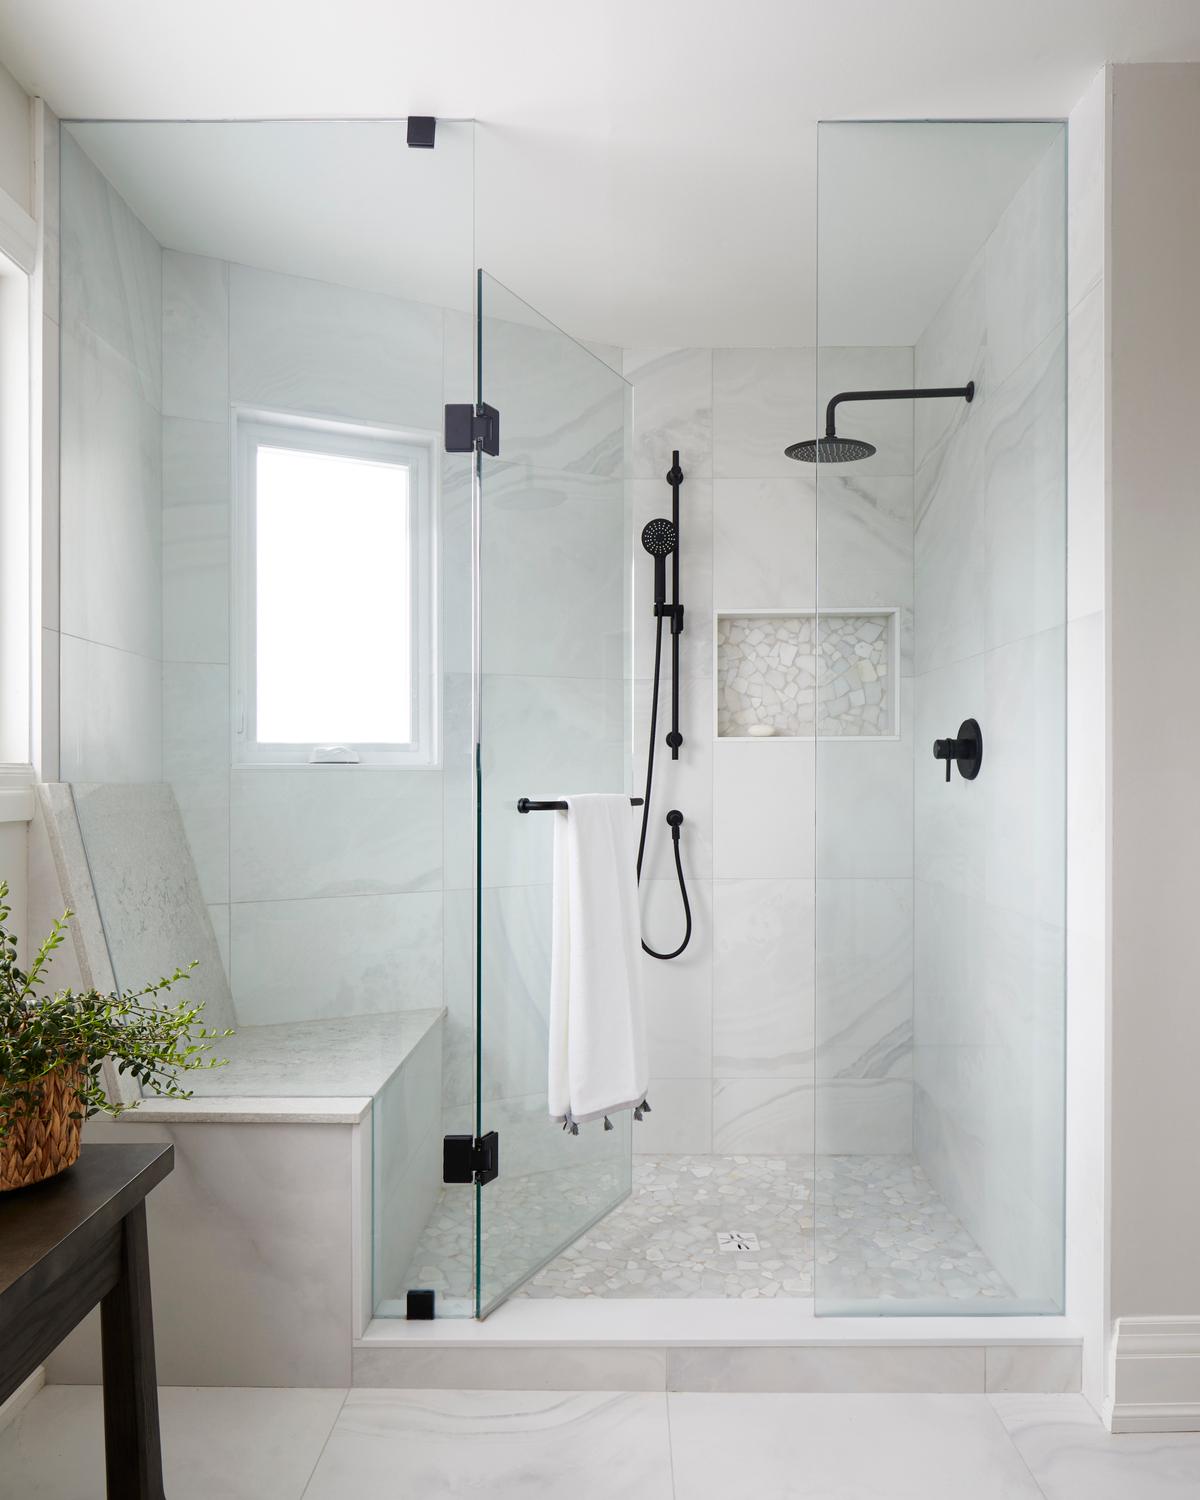 Modern primary ensuite shower with built-in seating and towel bar